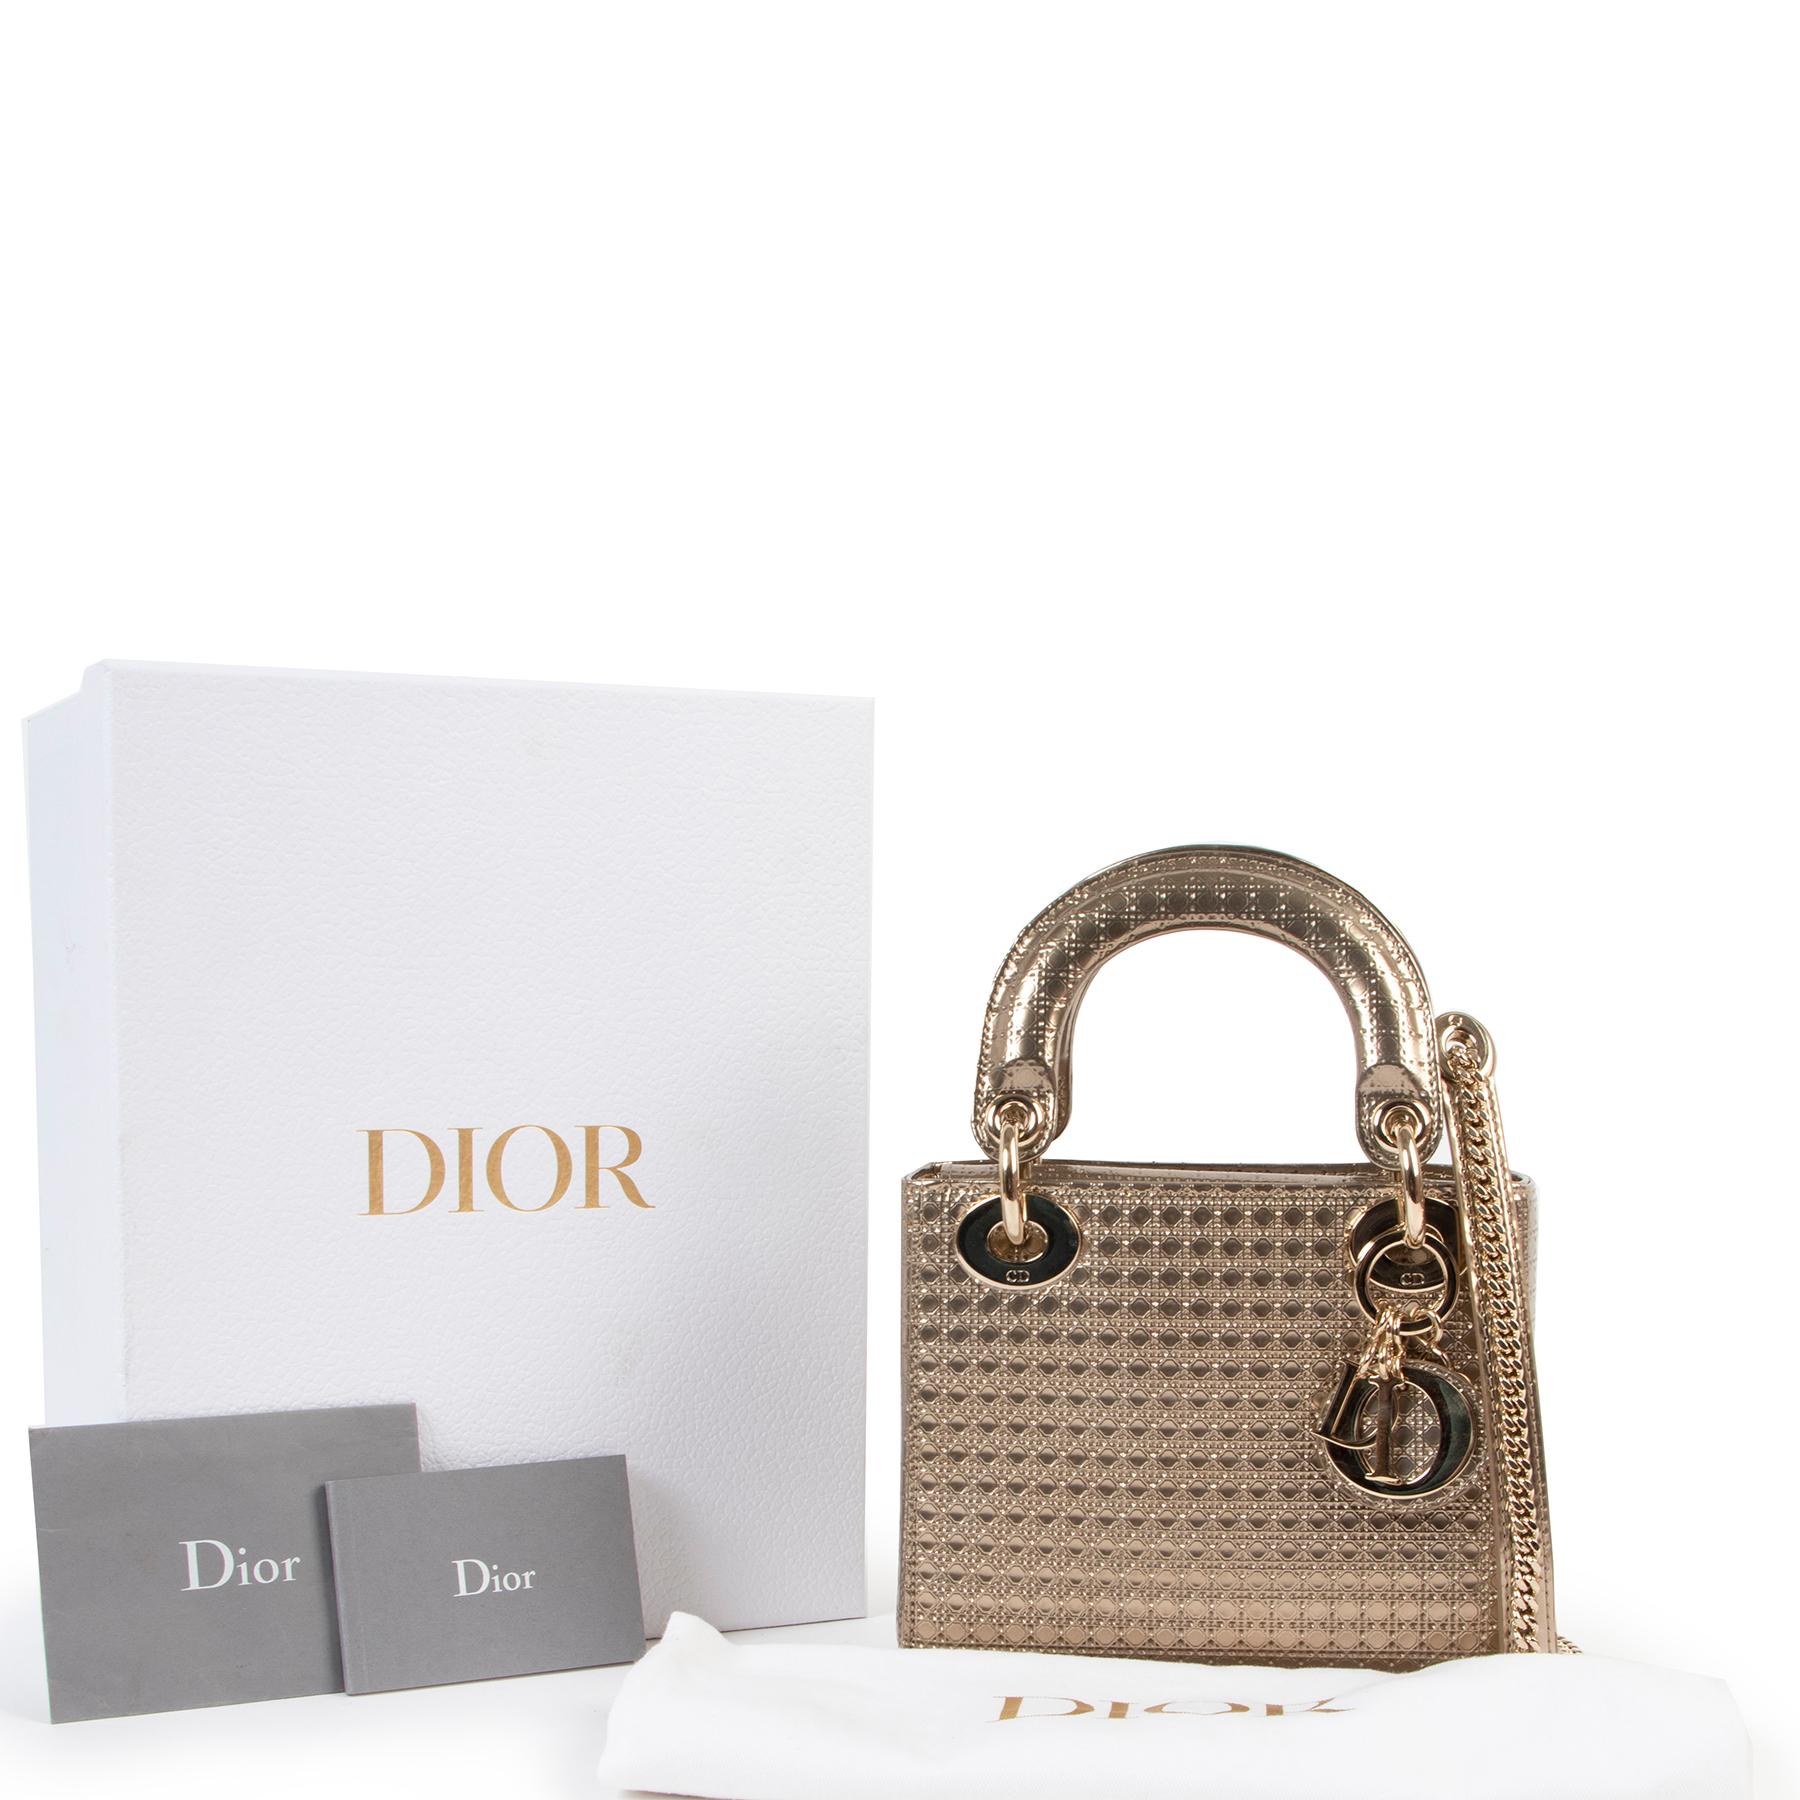 Christian Dior Lady Dior Mini Gold Micro Cannage Bag

The Lady Dior handbag embodies Maison Dior's elegance. This sleek and refined style is crafted in gold metallic leather and embossed with Micro Cannage pattern for evening allure. The gold-finish